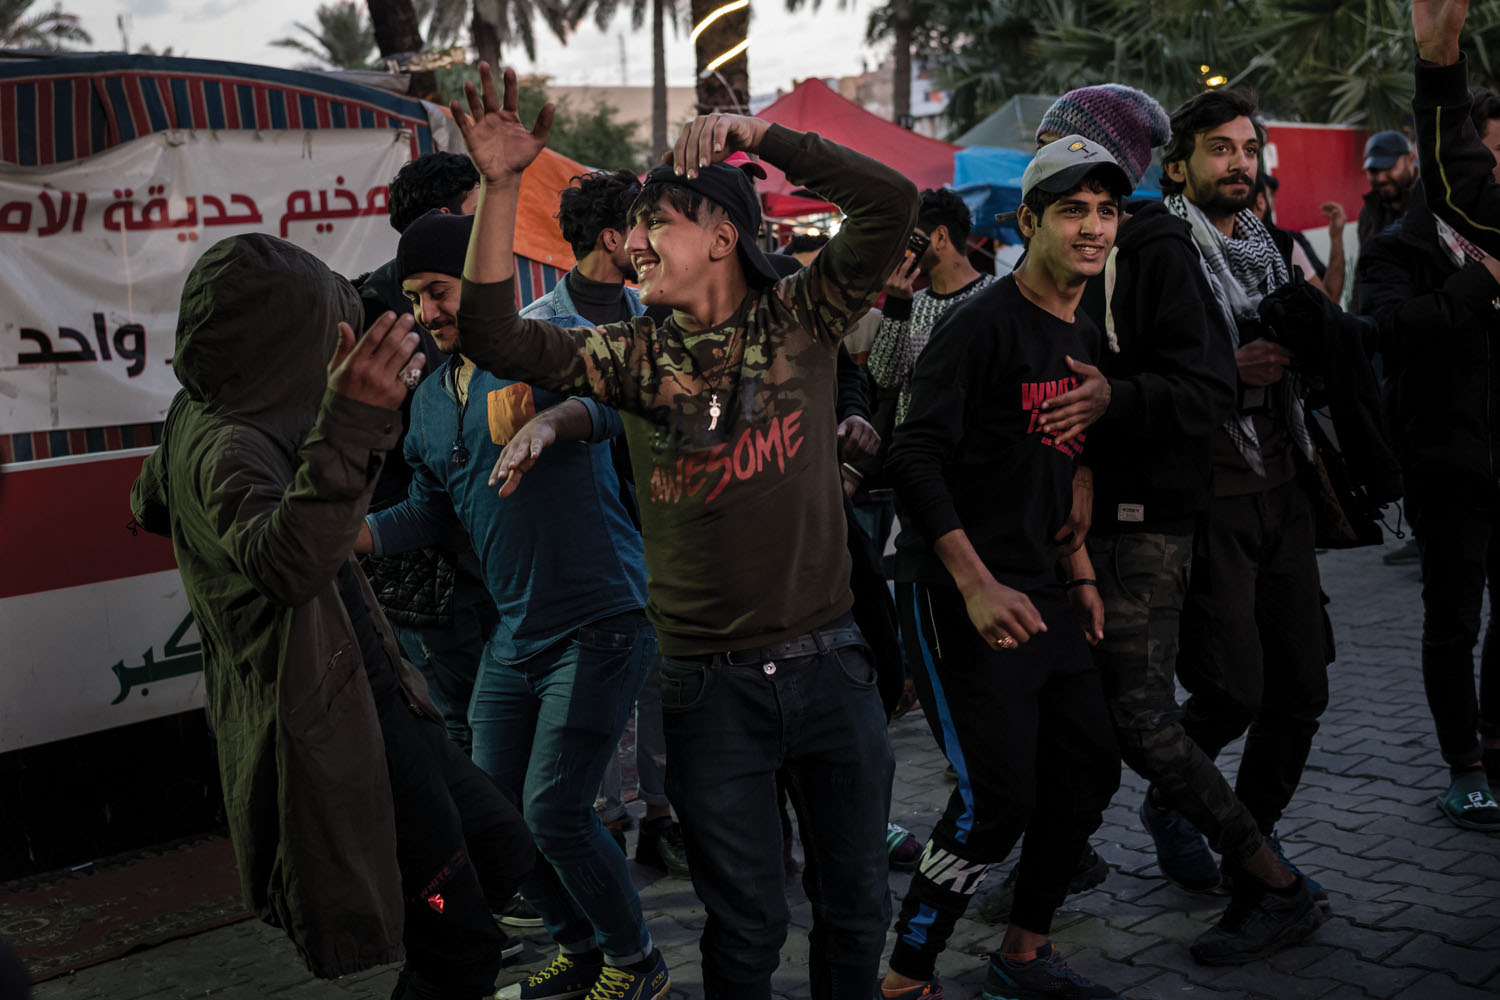 Protesters dance in front of their encampment in Tahrir Square. Tahrir translates to “liberation” or “freedom.”